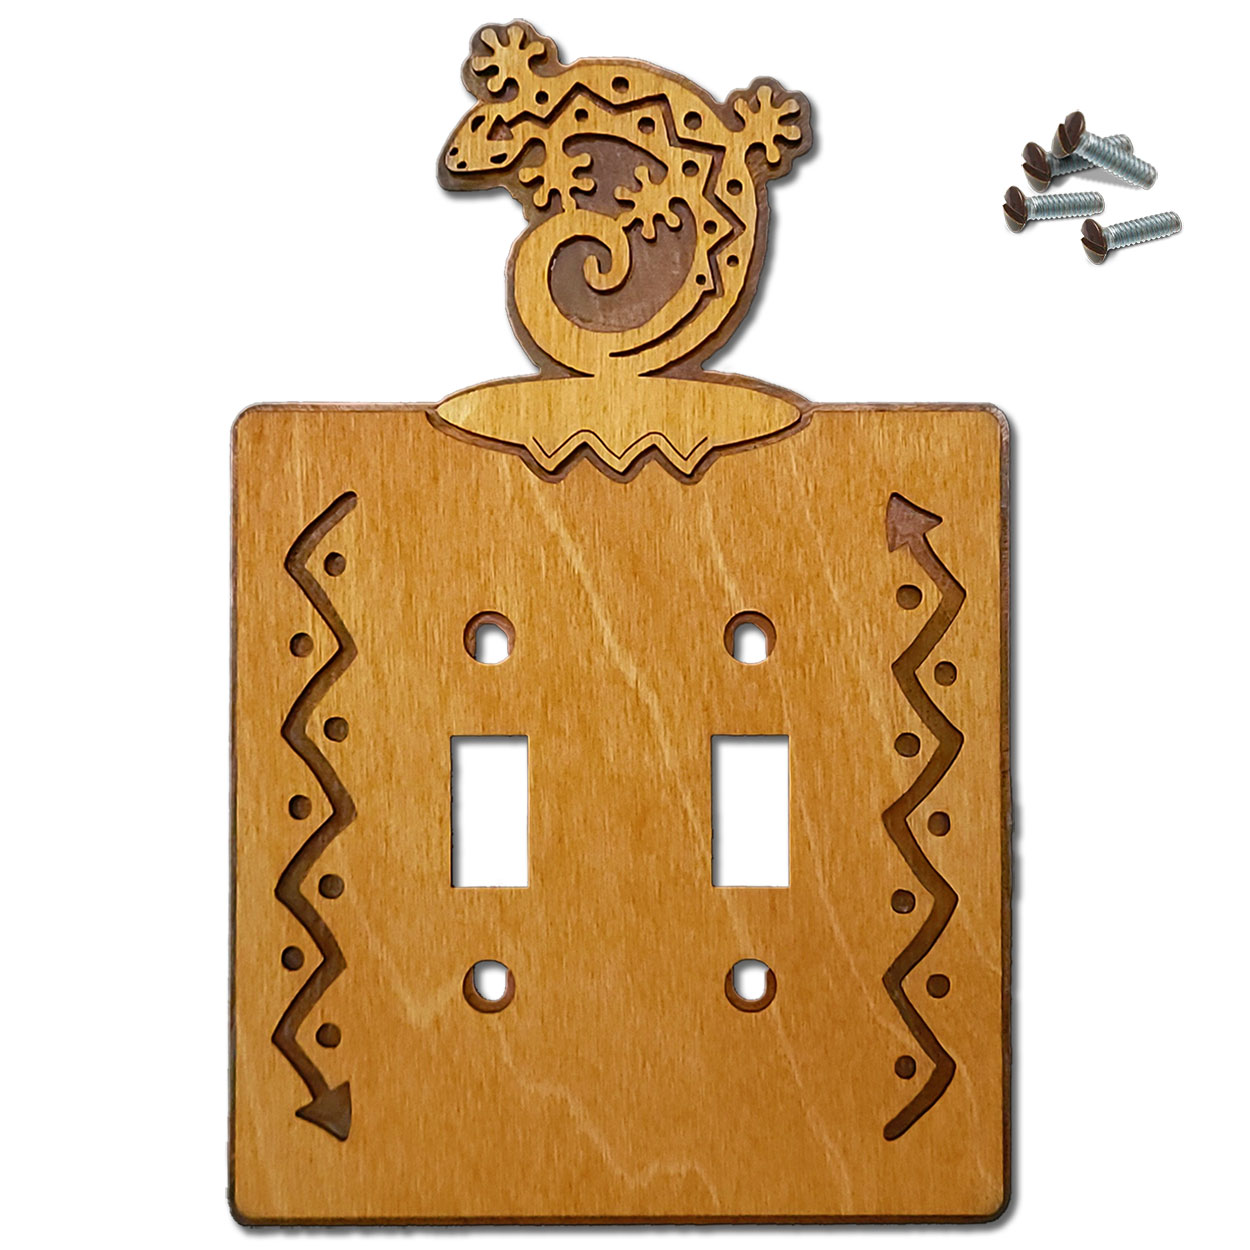 167922S -  Curled Gecko Southwestern Decor Double Standard Switch Plate in Golden Sienna